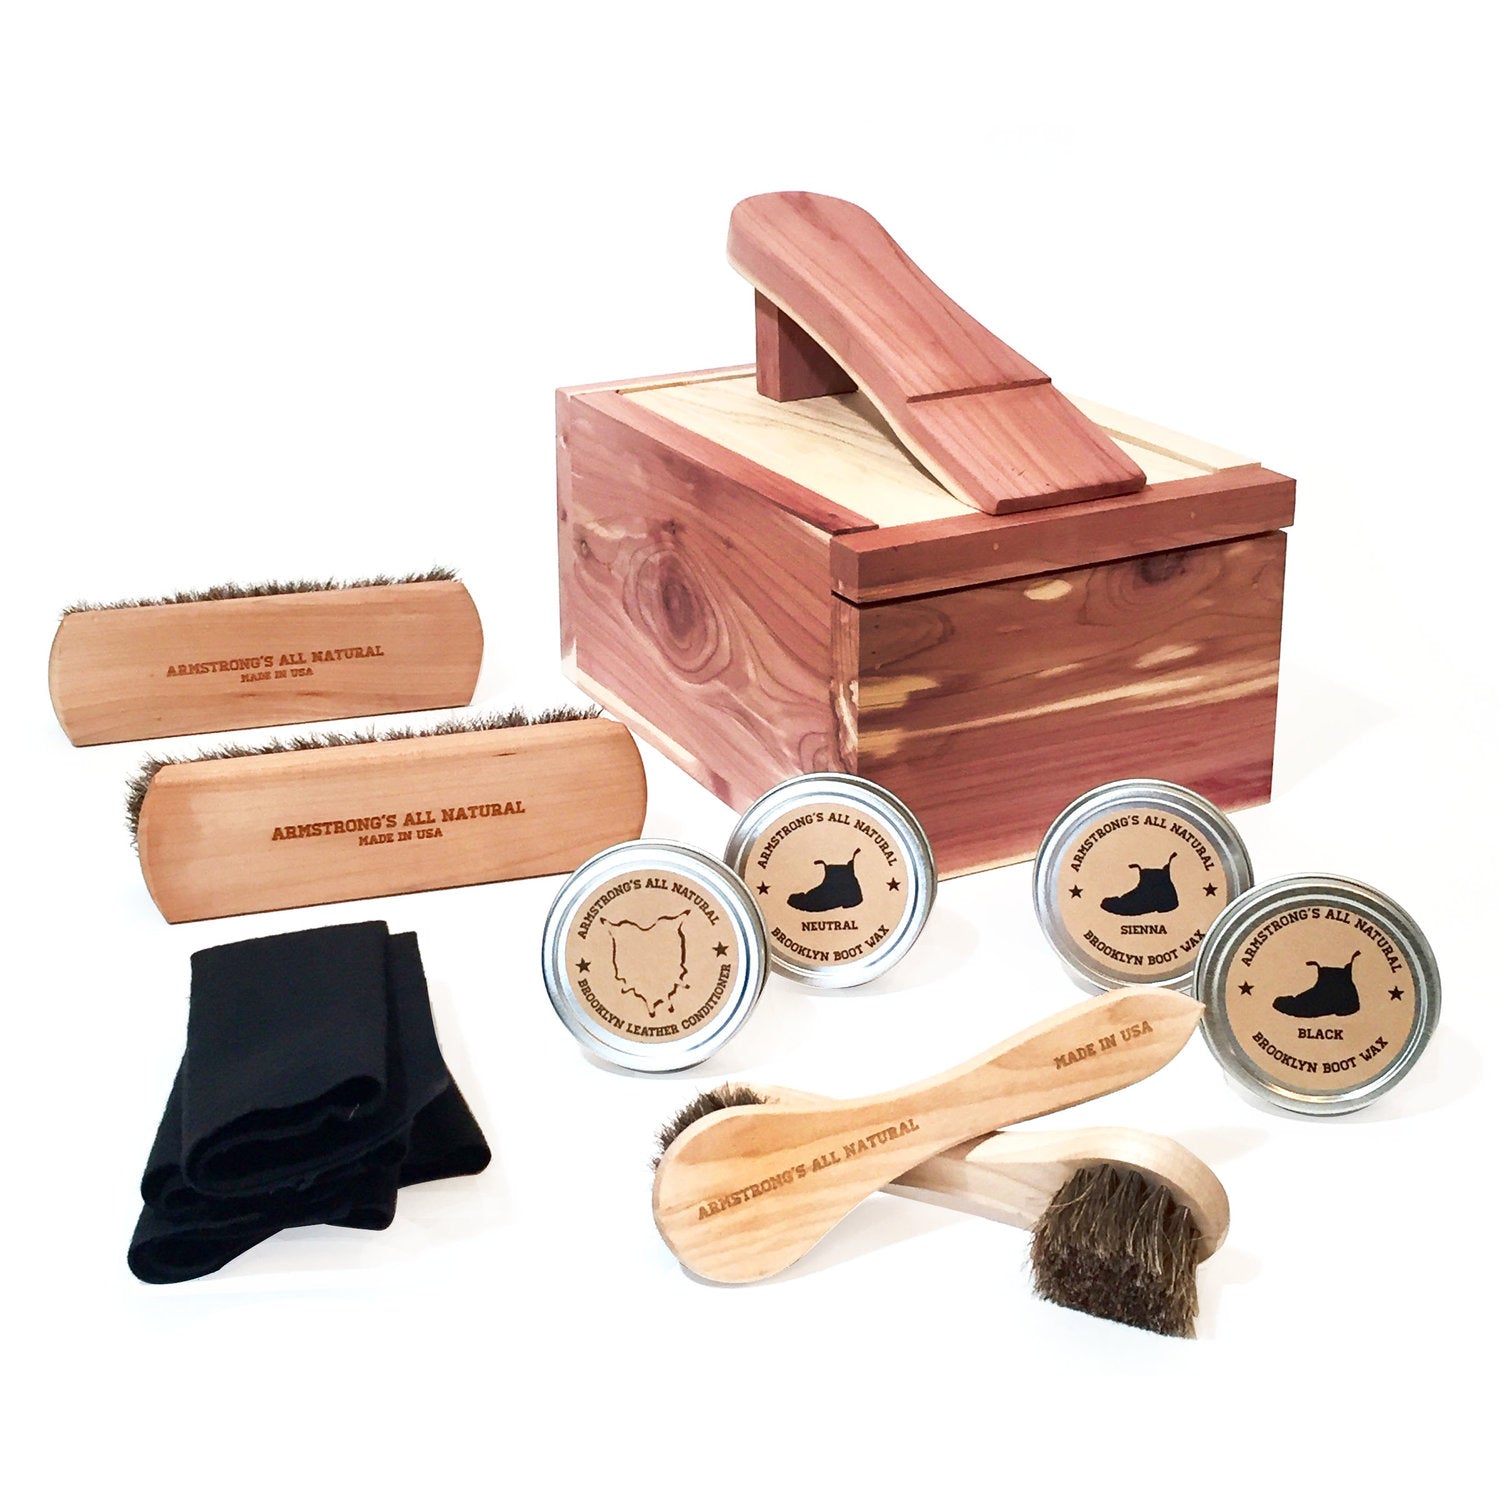 Luxury shoe polish box Step up your game with this cedar shoe shine box, proudly made in the USA and loaded with everything you need to keep your entire leather shoe collection in top shape.